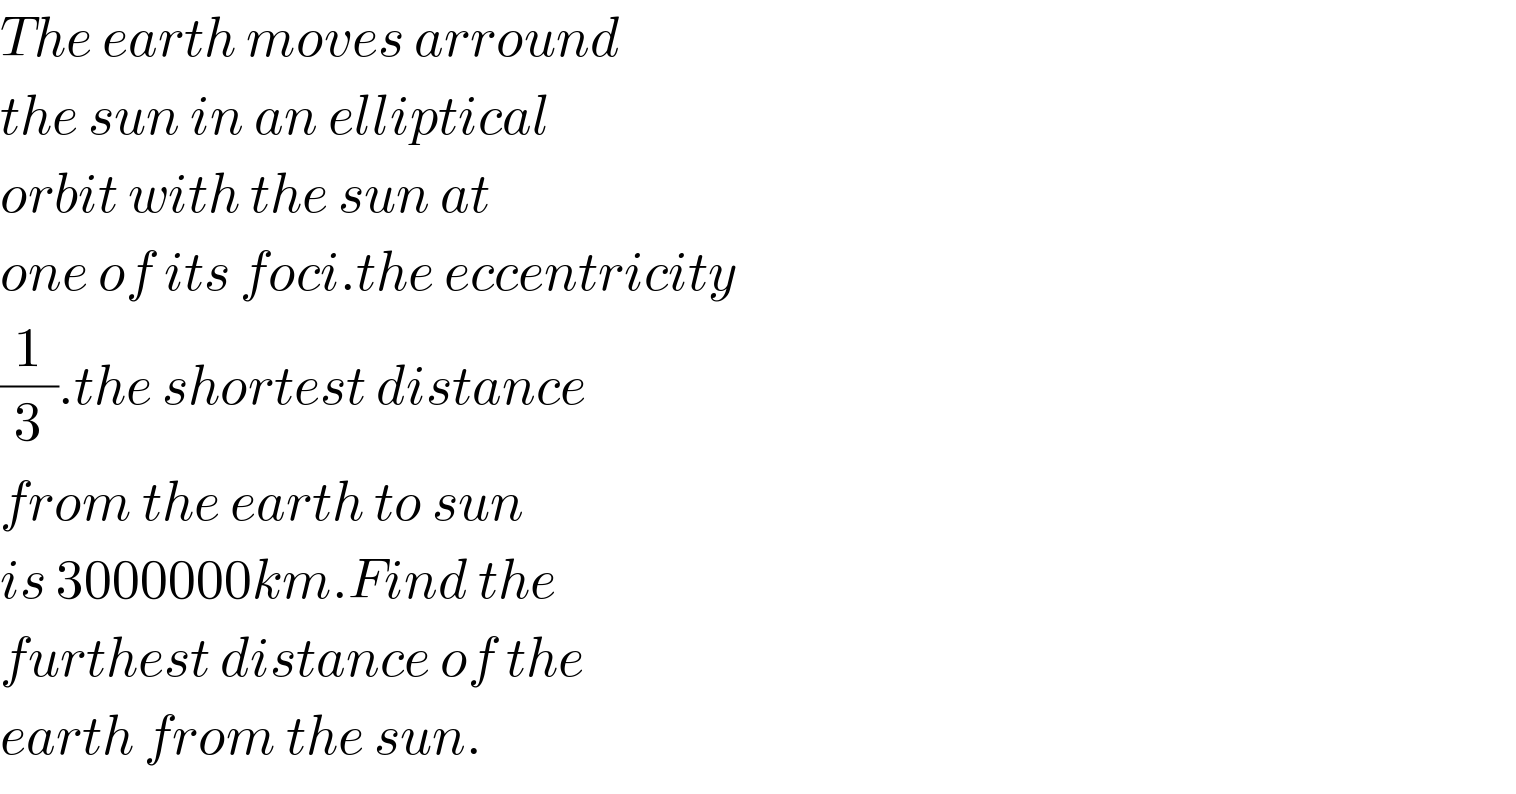 The earth moves arround  the sun in an elliptical  orbit with the sun at  one of its foci.the eccentricity  (1/3).the shortest distance  from the earth to sun   is 3000000km.Find the  furthest distance of the  earth from the sun.  